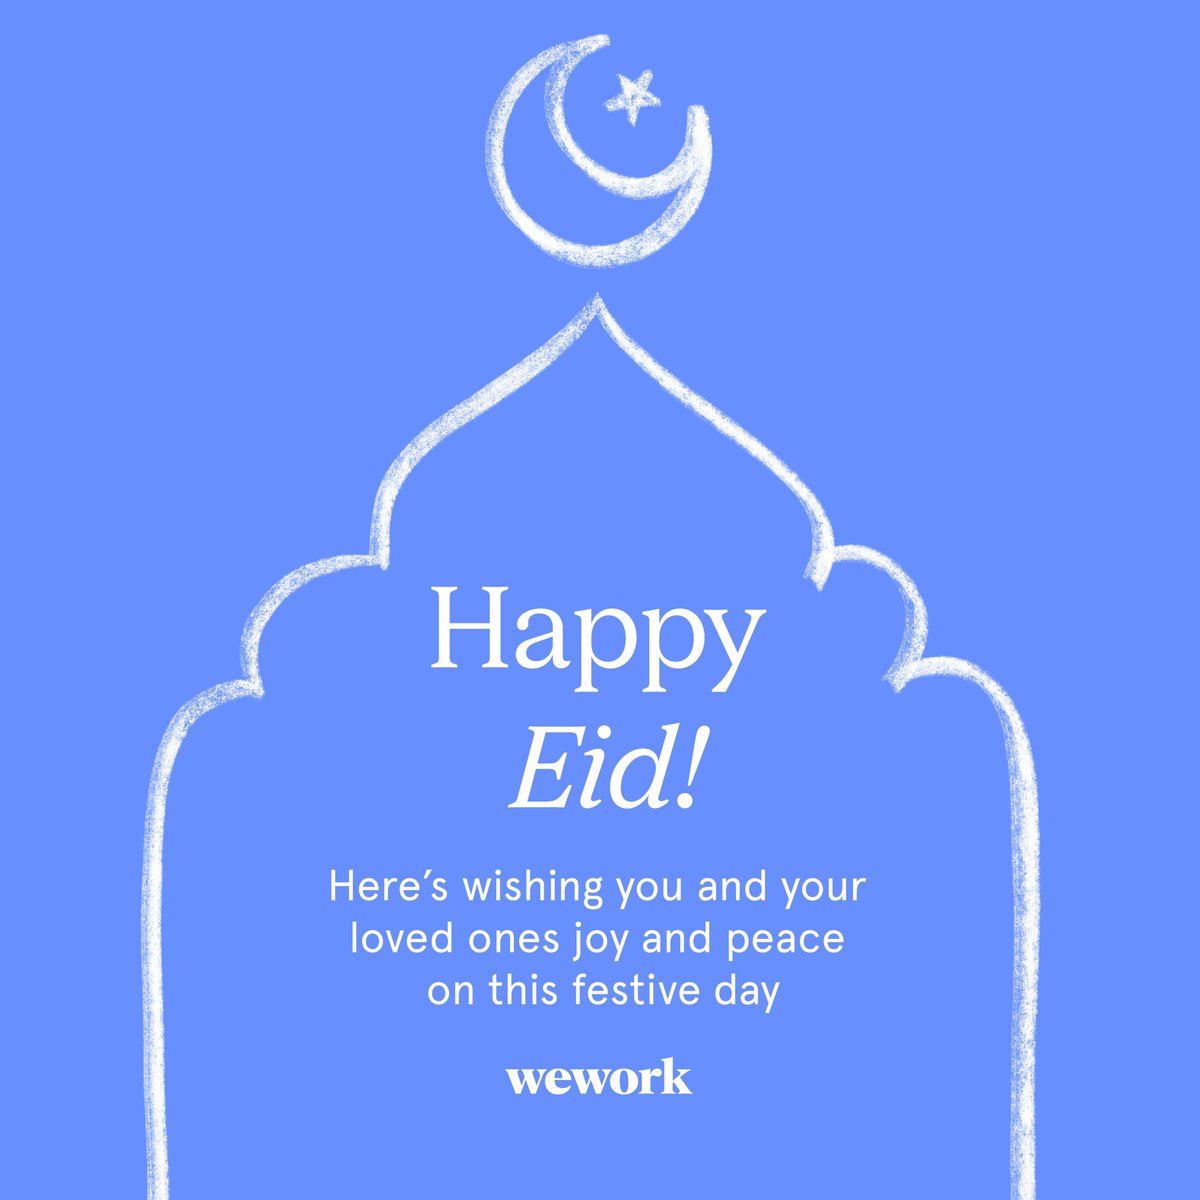 Happy Eid from everyone at WeWork India! #WeWork #WeWorkIndia